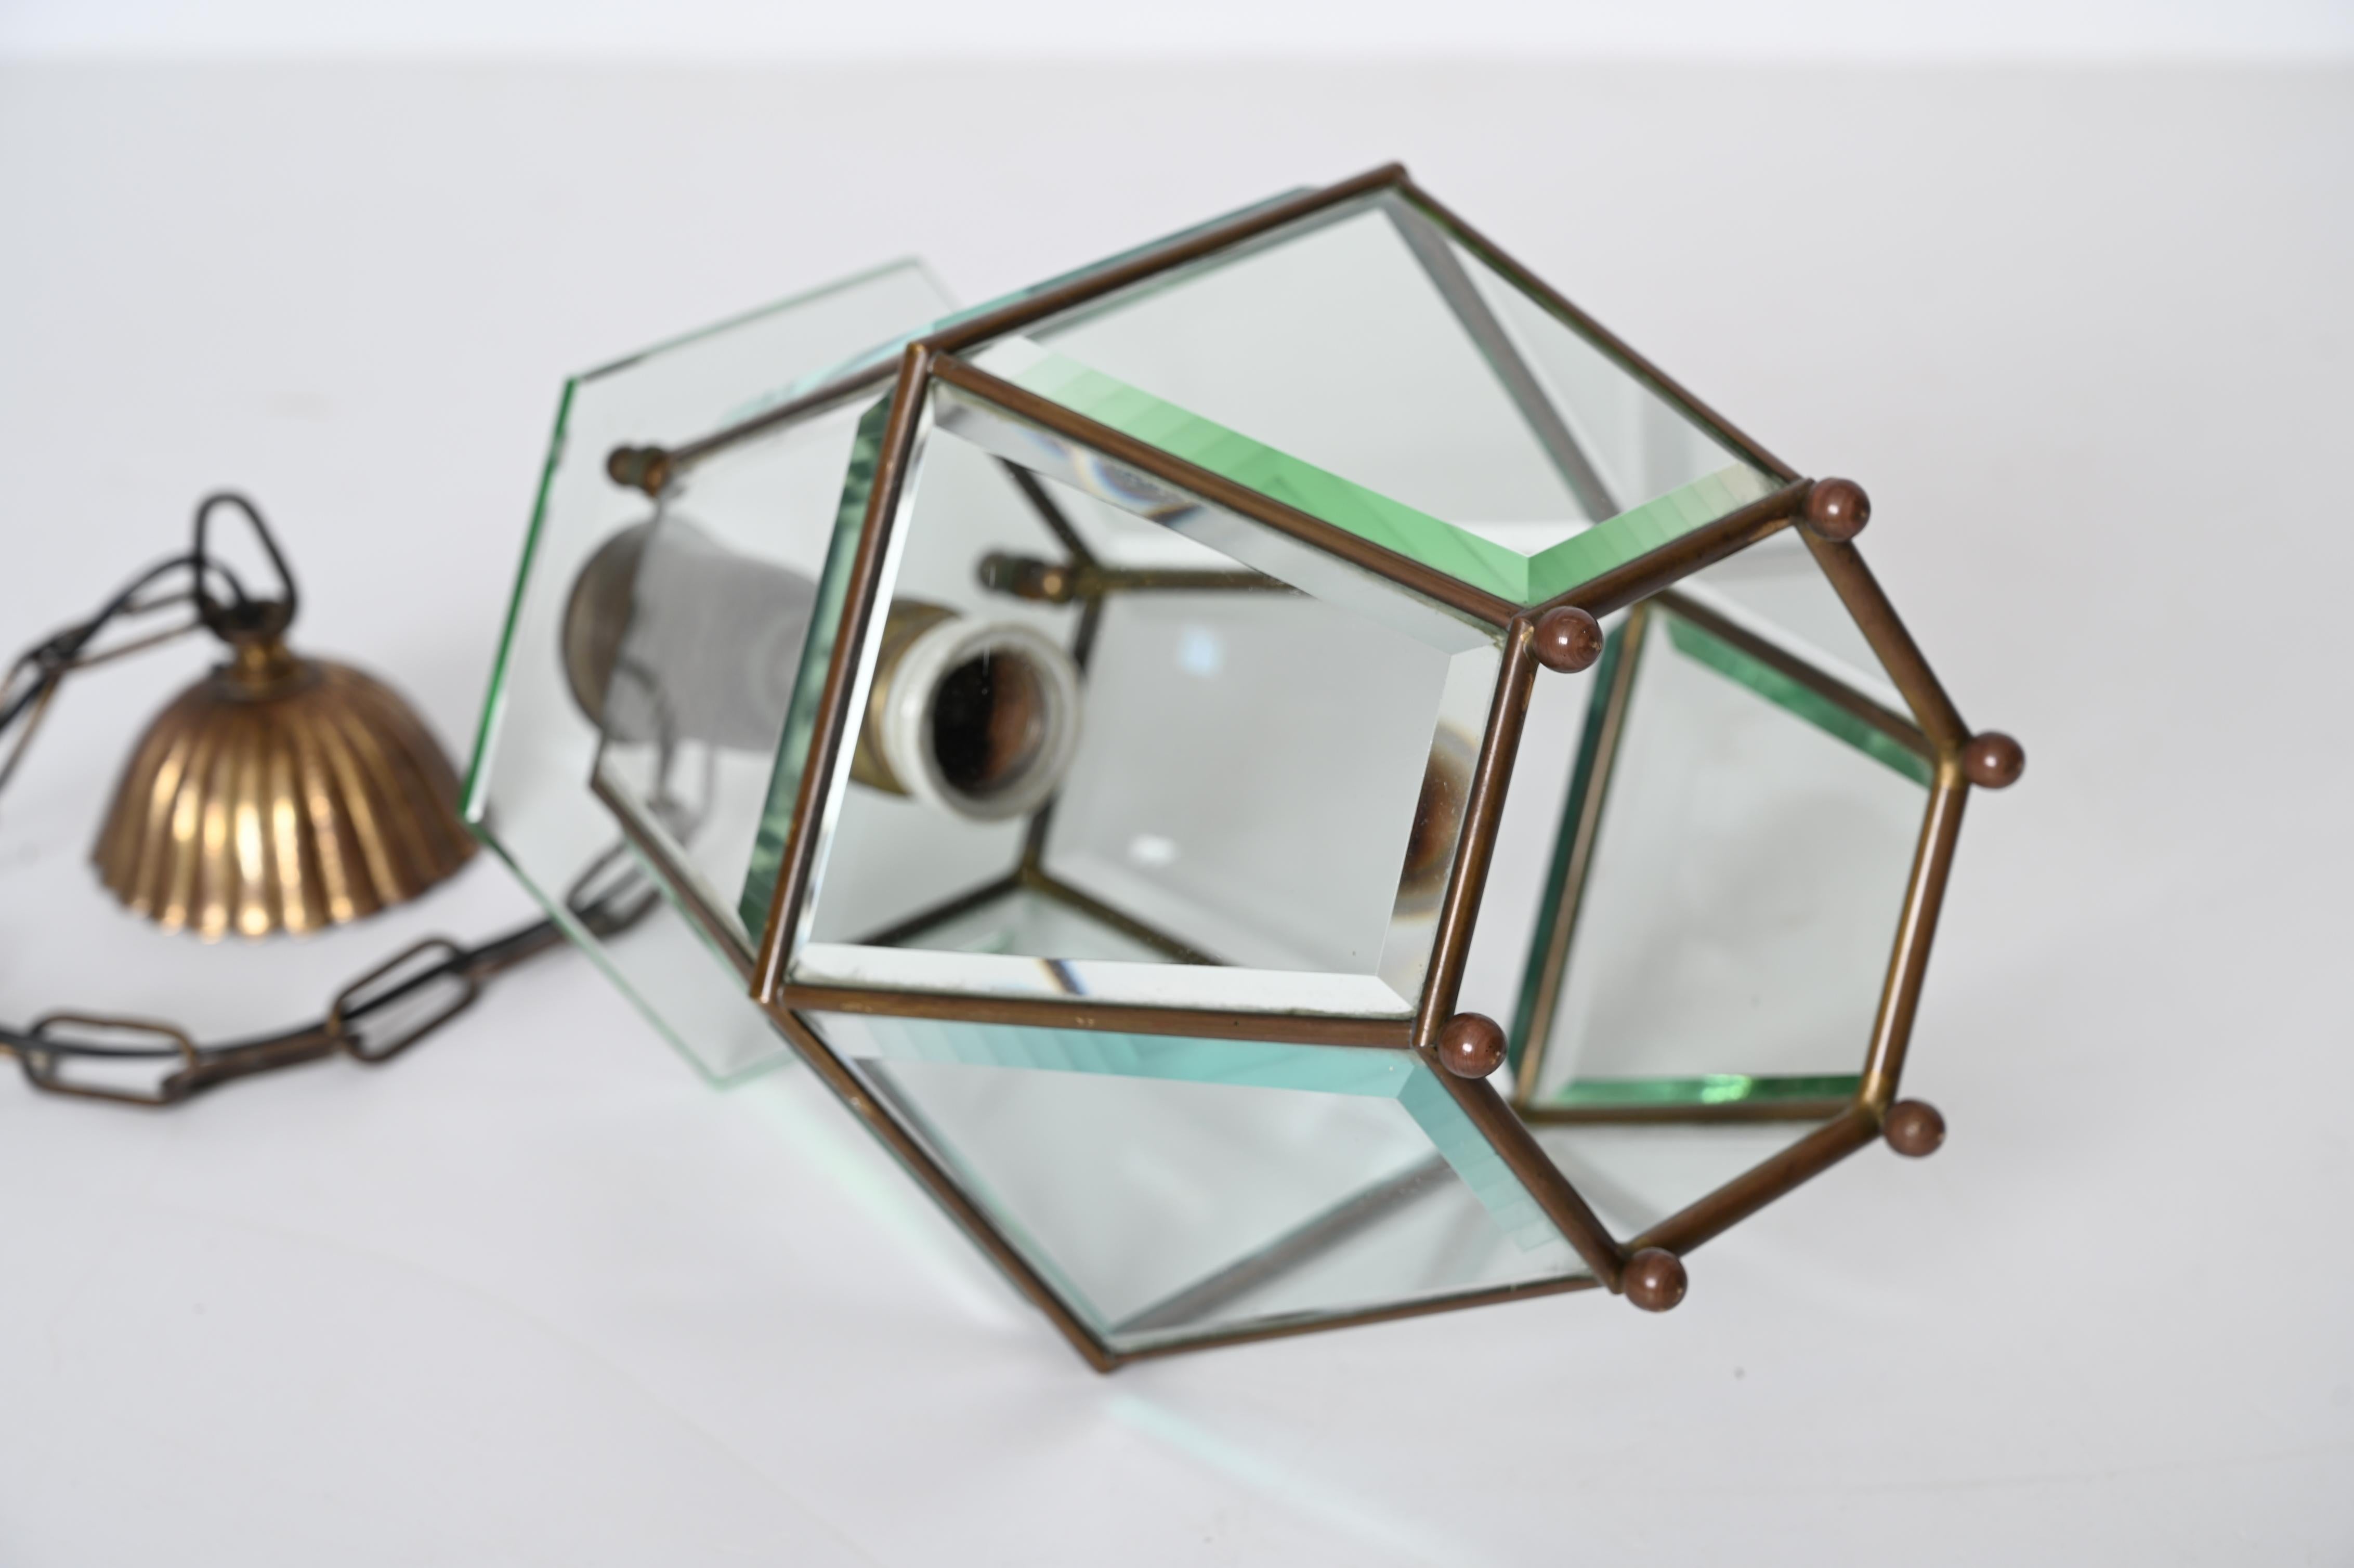 Brass and Beveled Glass Hexagonal Italian Chandelier after Adolf Loos, 1950s For Sale 8